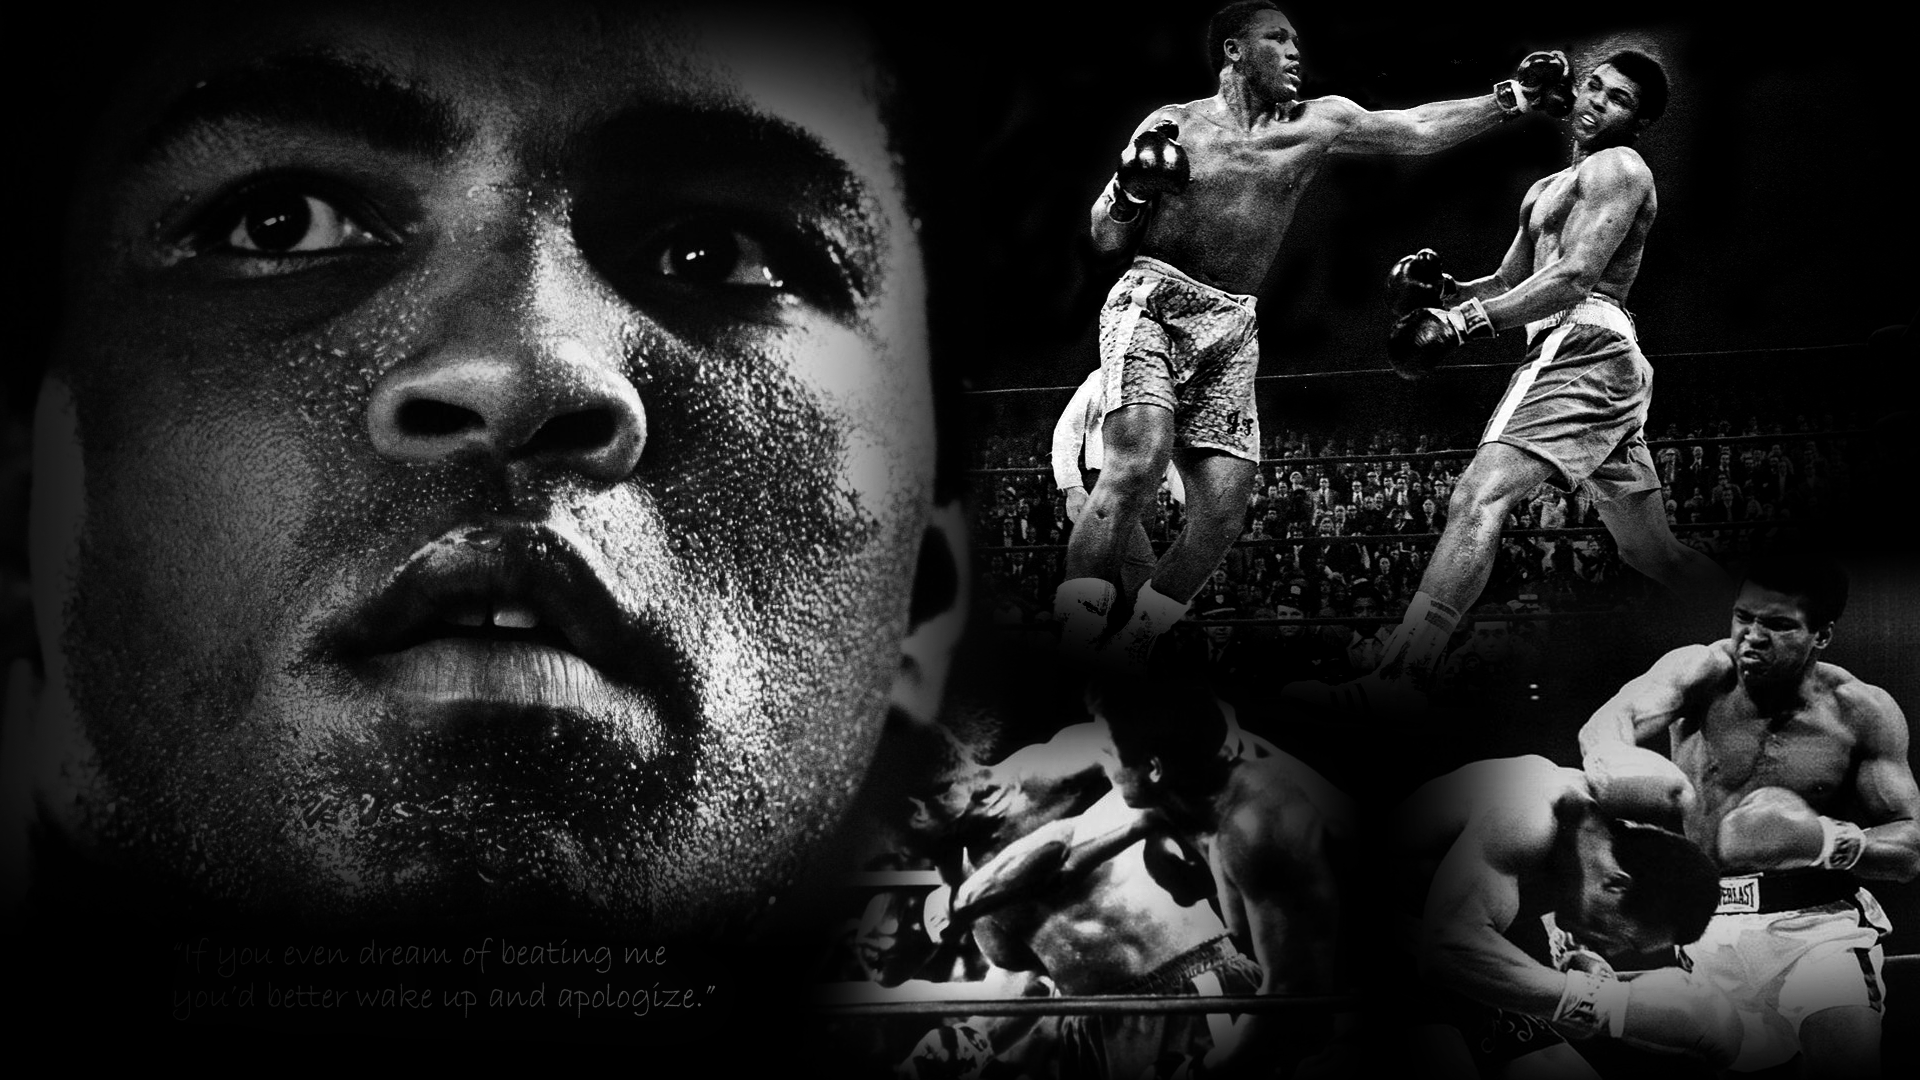  wallpaper people males wallpaper poster of muhammad the greatest ali 1920x1080